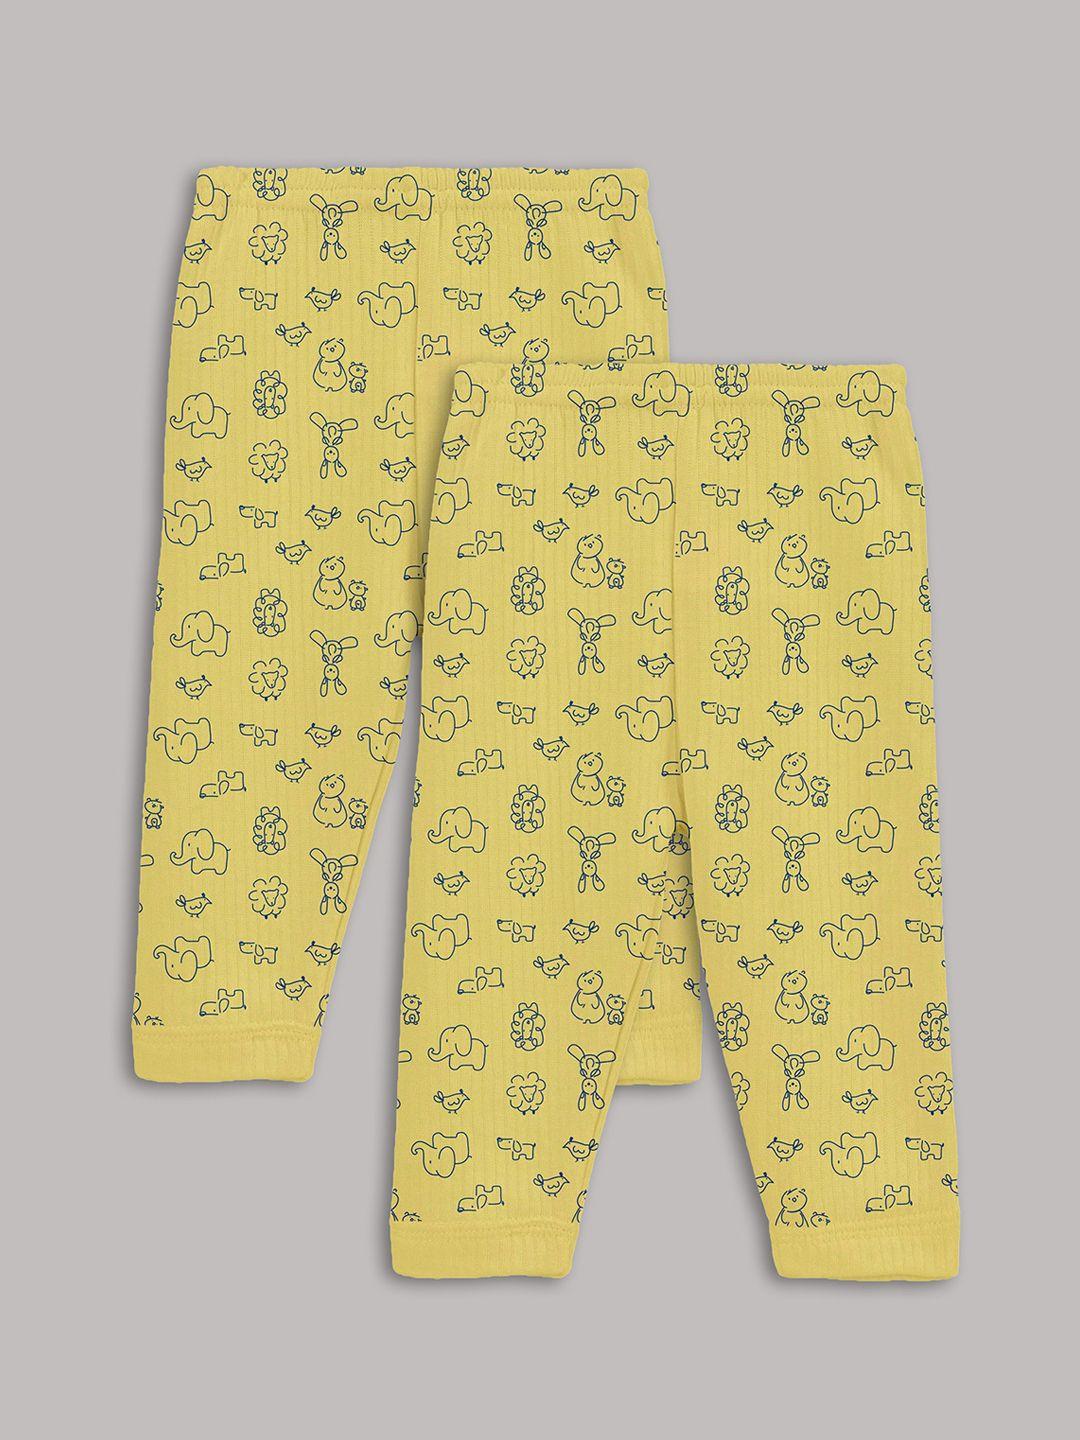 kanvin boys pack of 2 printed thermal bottoms